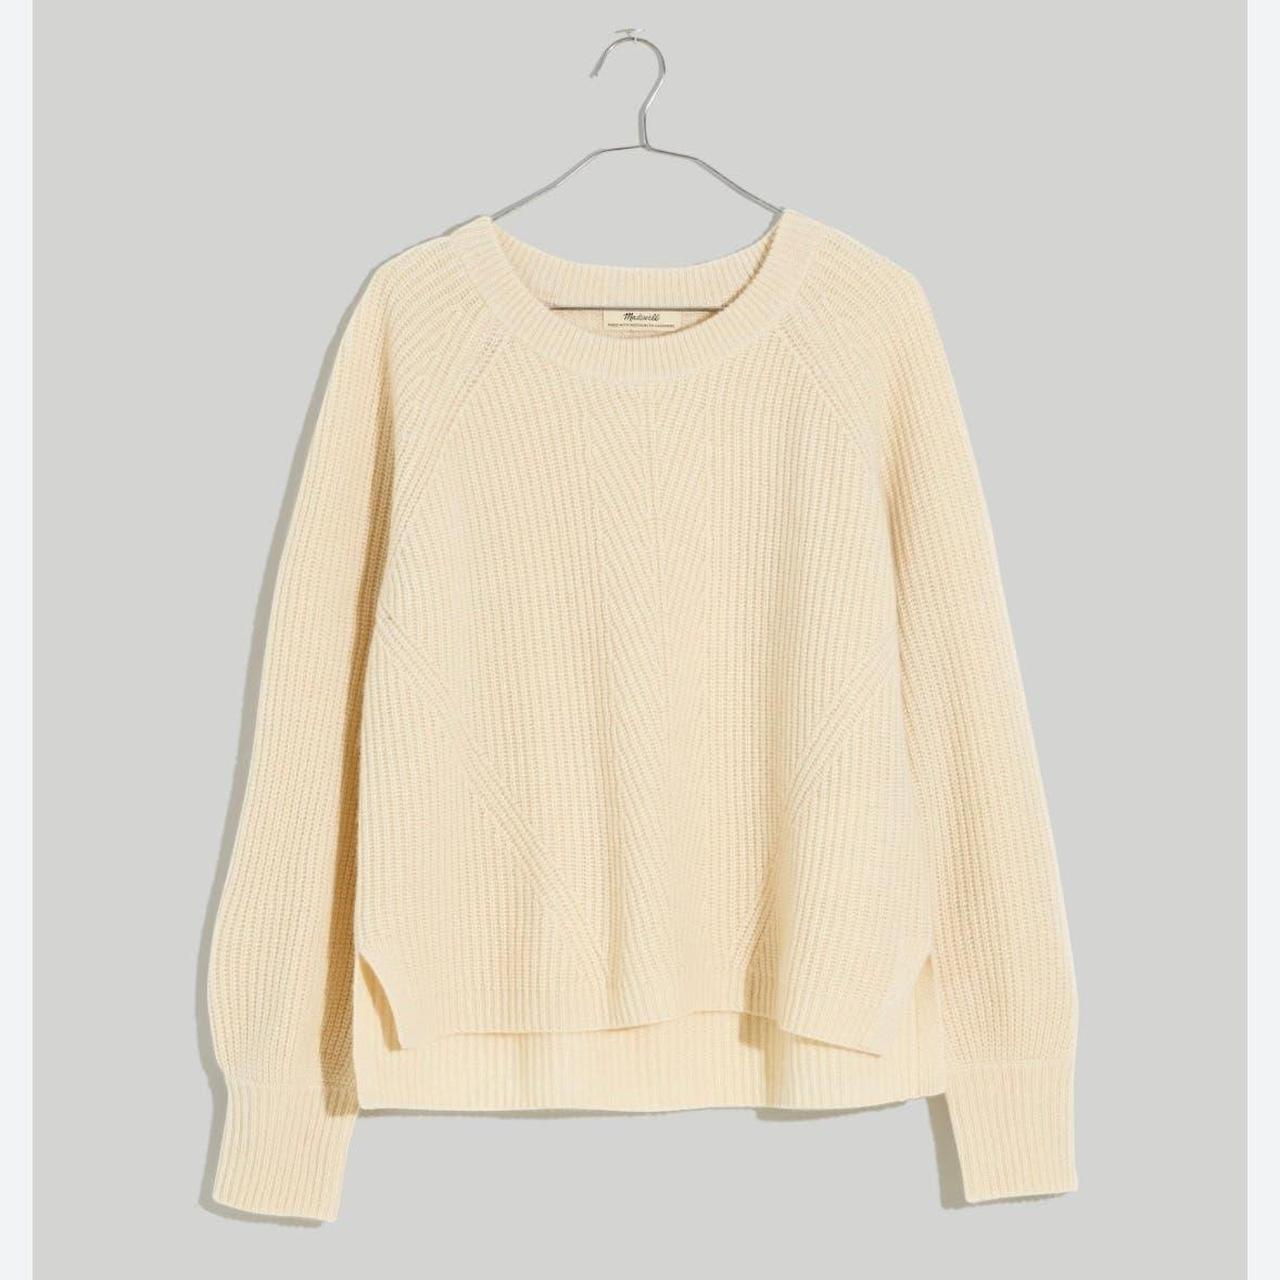 Madewell Re)sourced Cashmere Fisherman - Depop